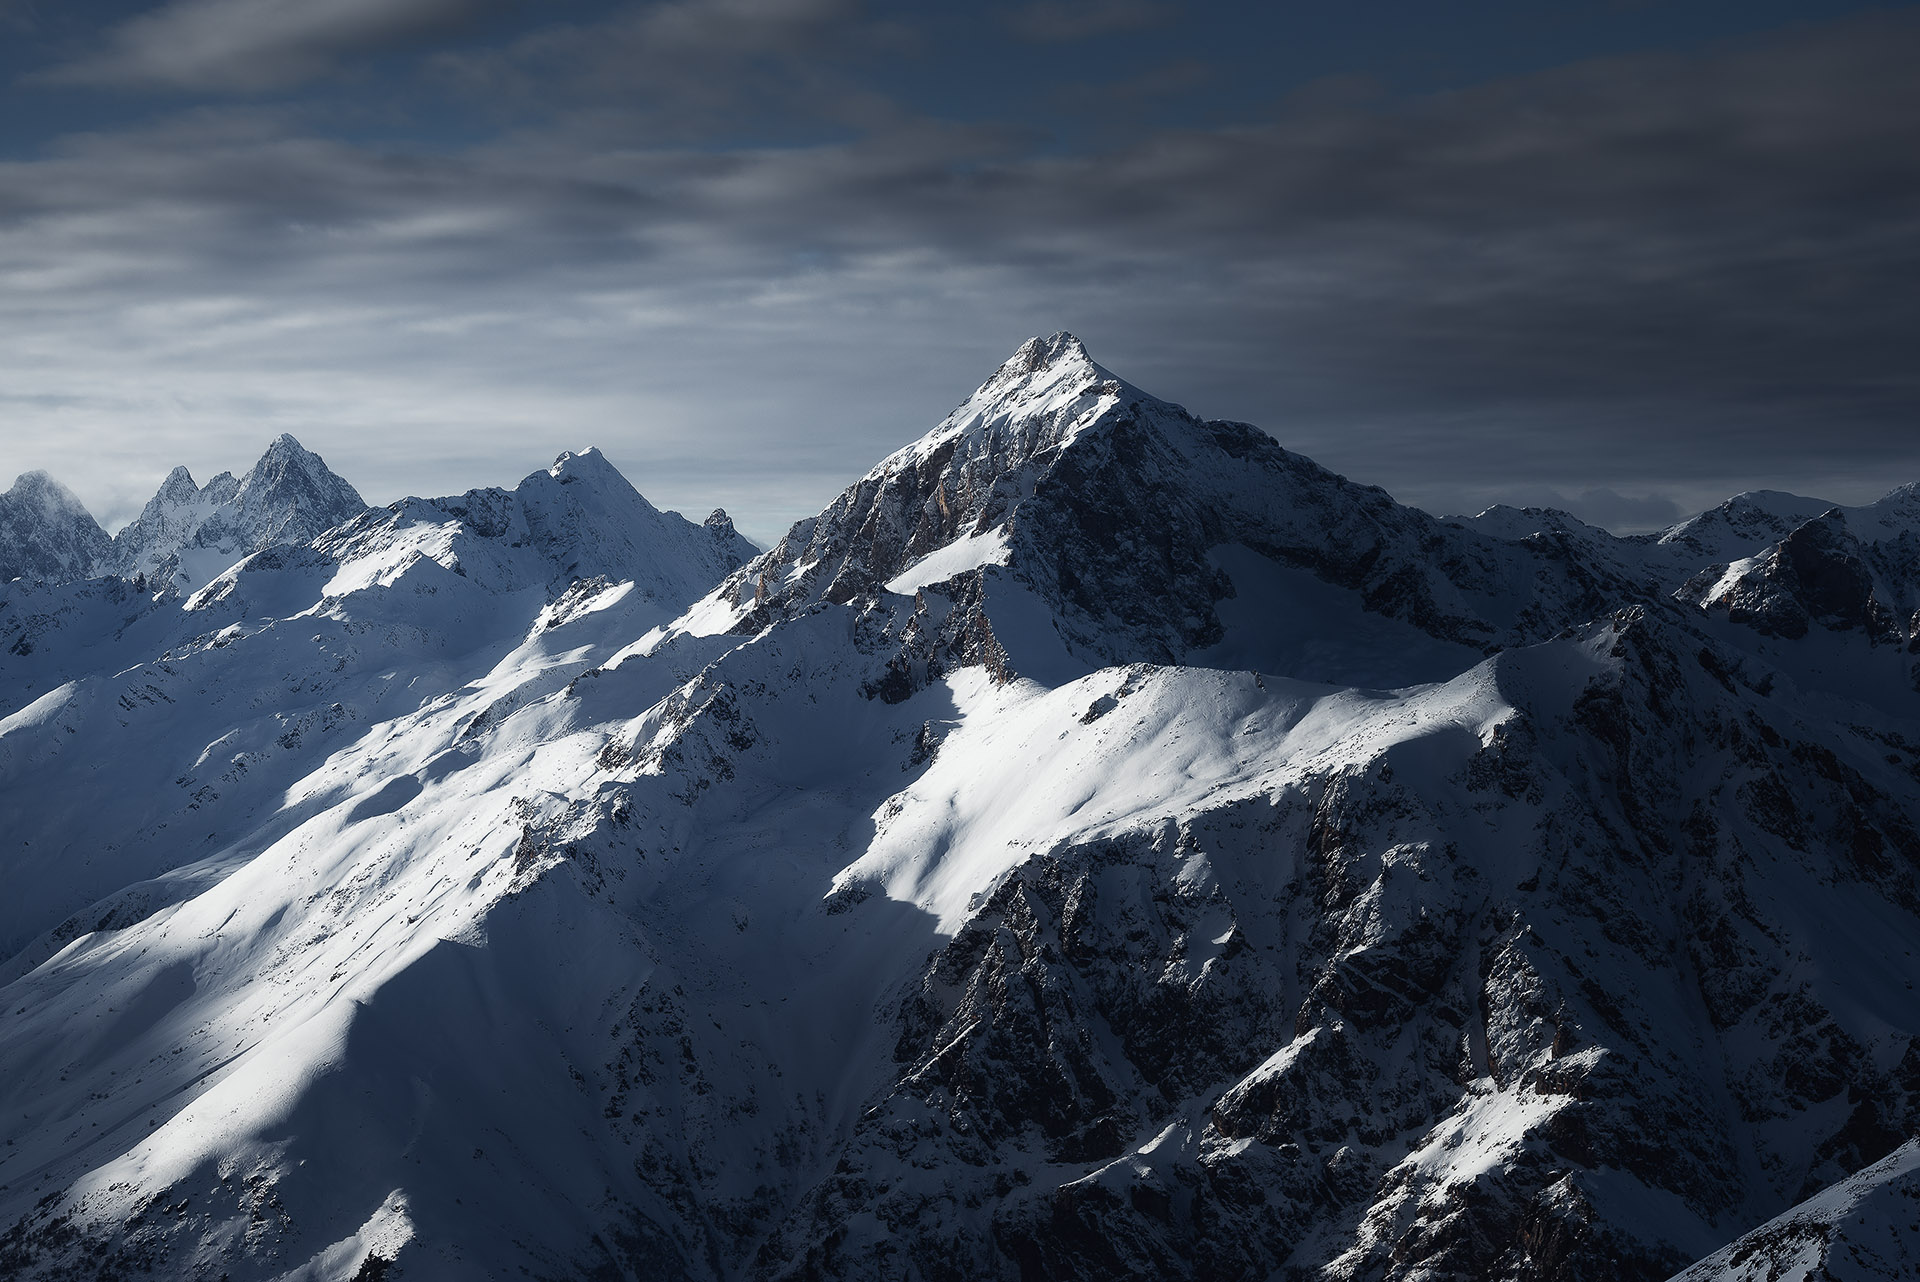 General 1920x1282 mountains snowy peak snow clouds nature snowy mountain sky mountain chain